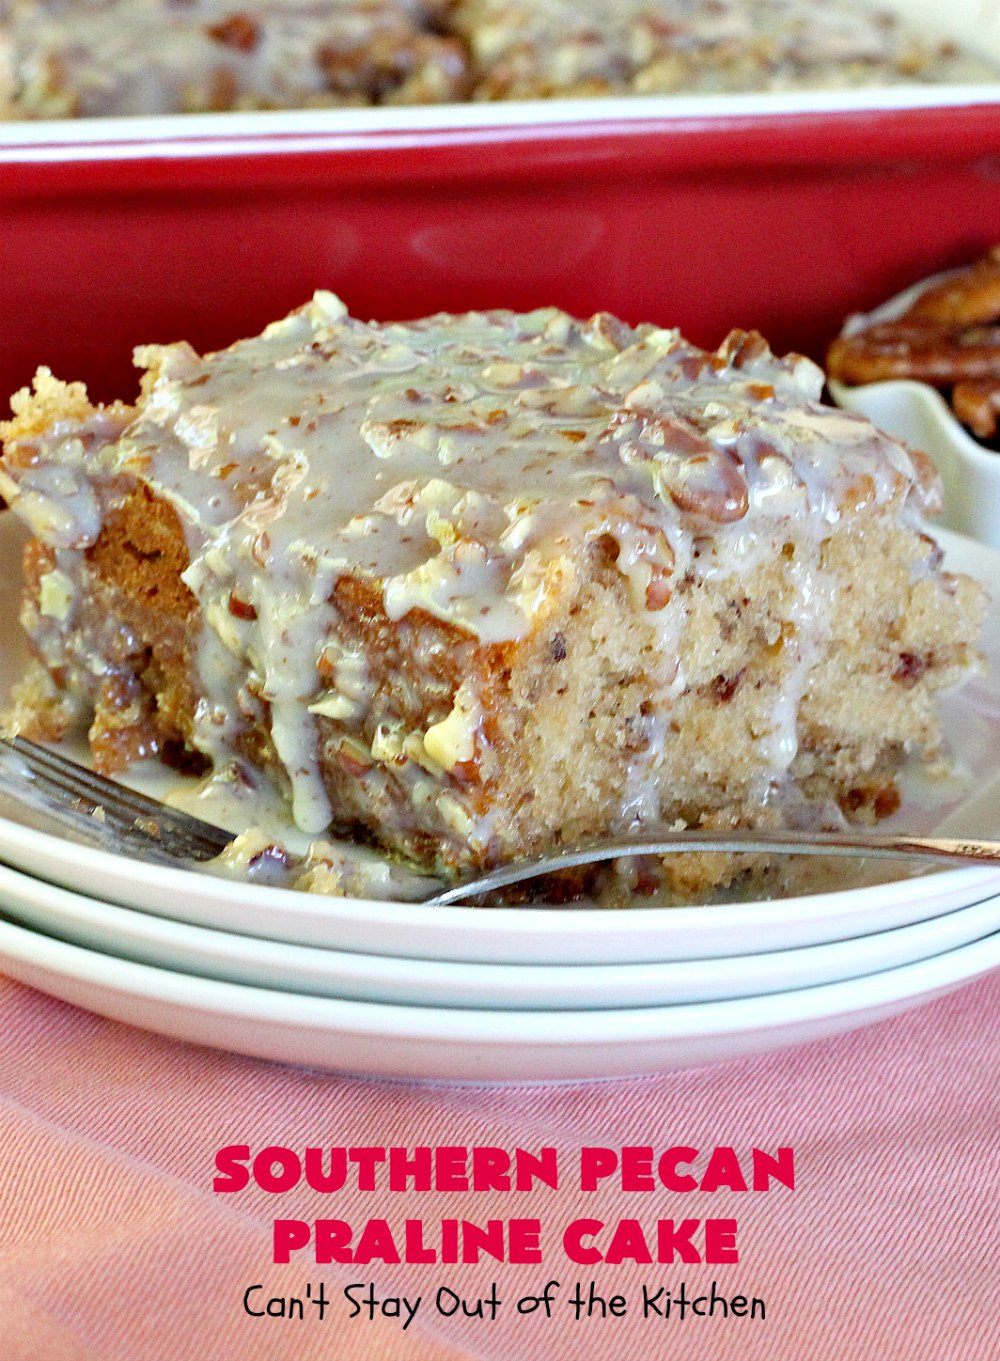 Southern Pecan Praline Cake - Can't Stay Out of the Kitchen